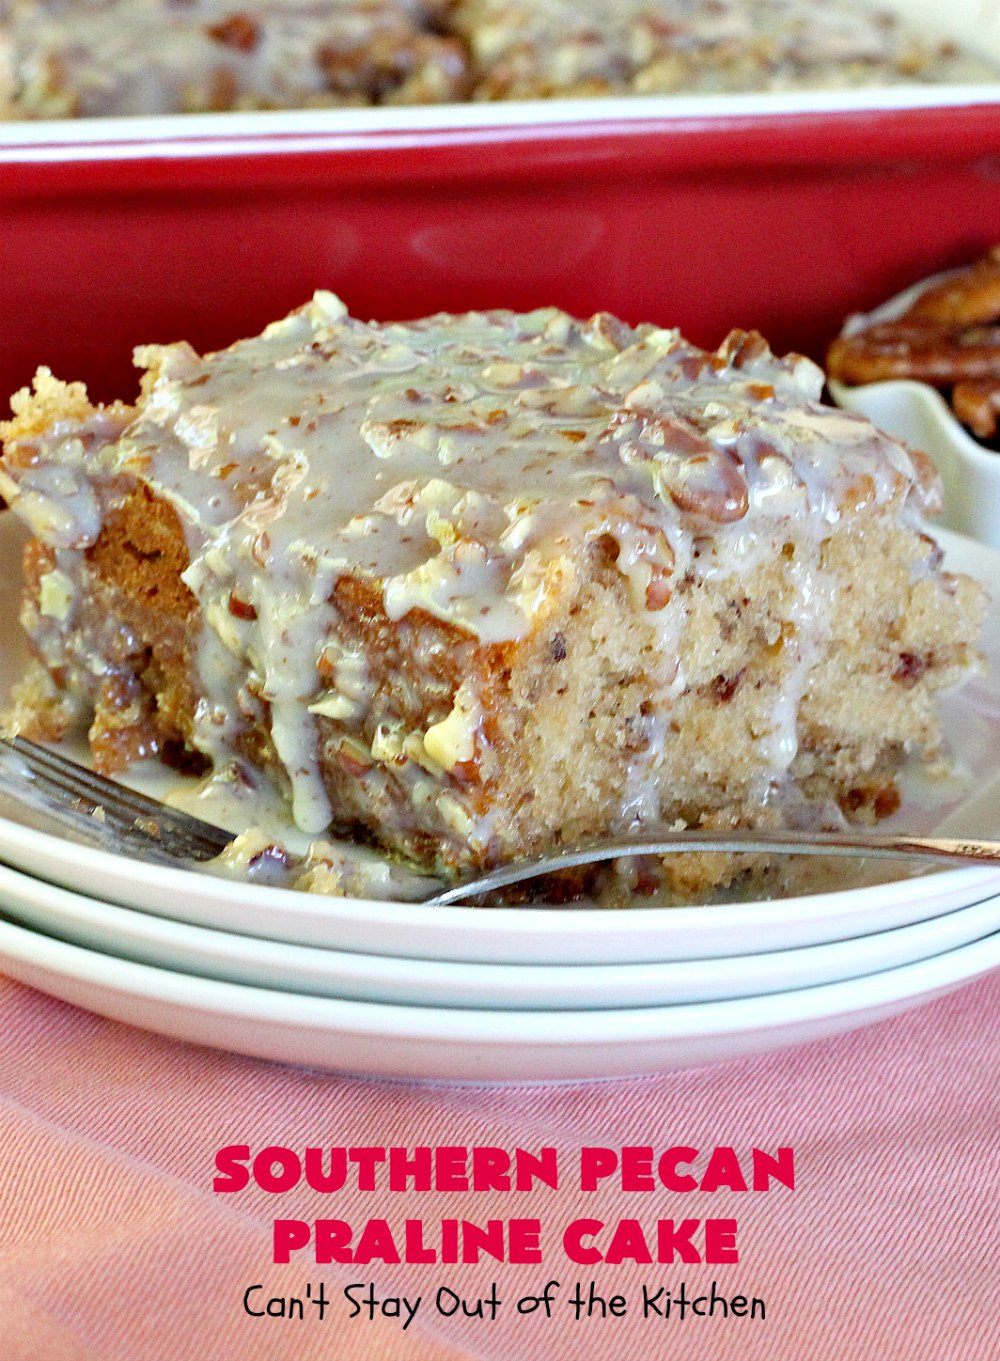 Southern Pecan Praline Cake - Can't Stay Out of the Kitchen